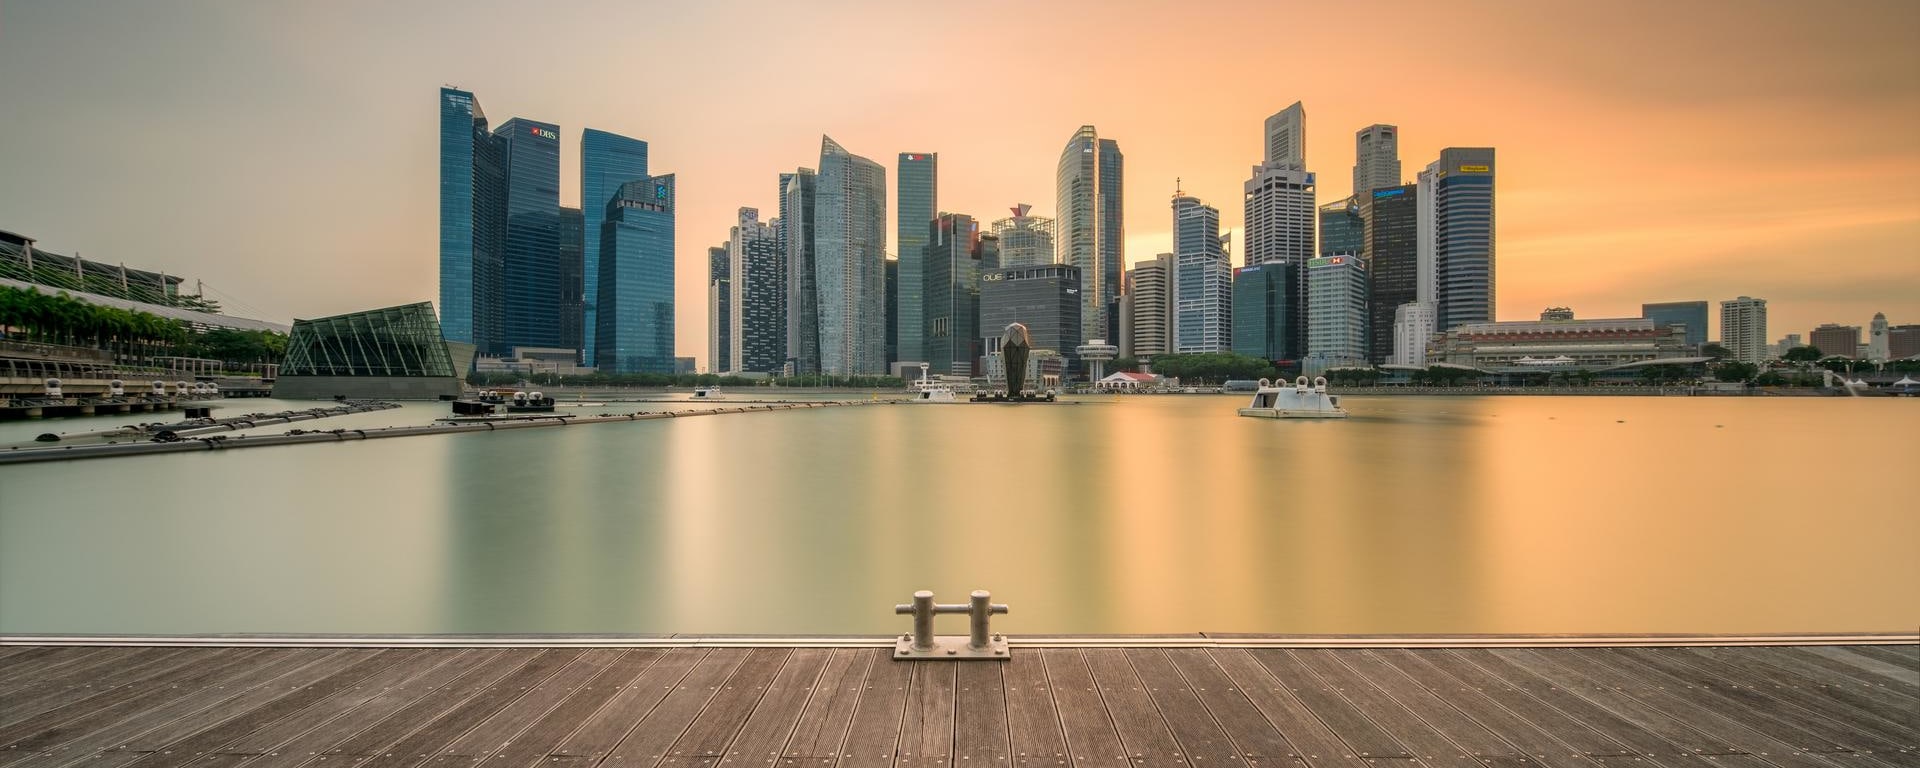 Skyline from Singapore at sunset